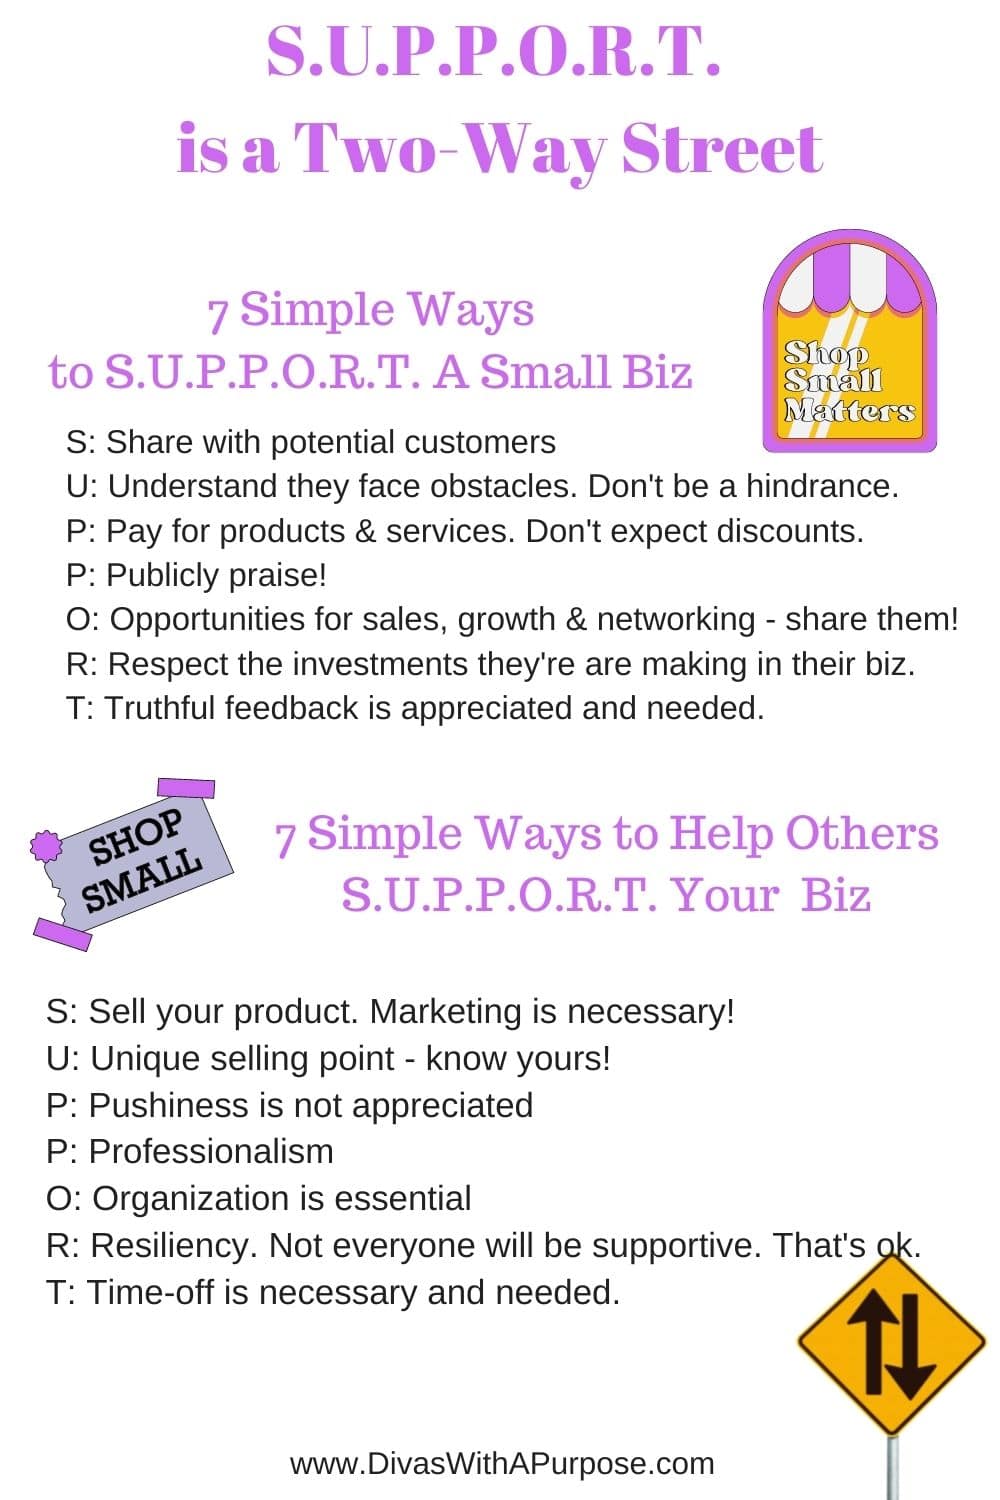 S.U.P.P.O.R.T. is a Two-Way Street - simple ways small businesses can receive support